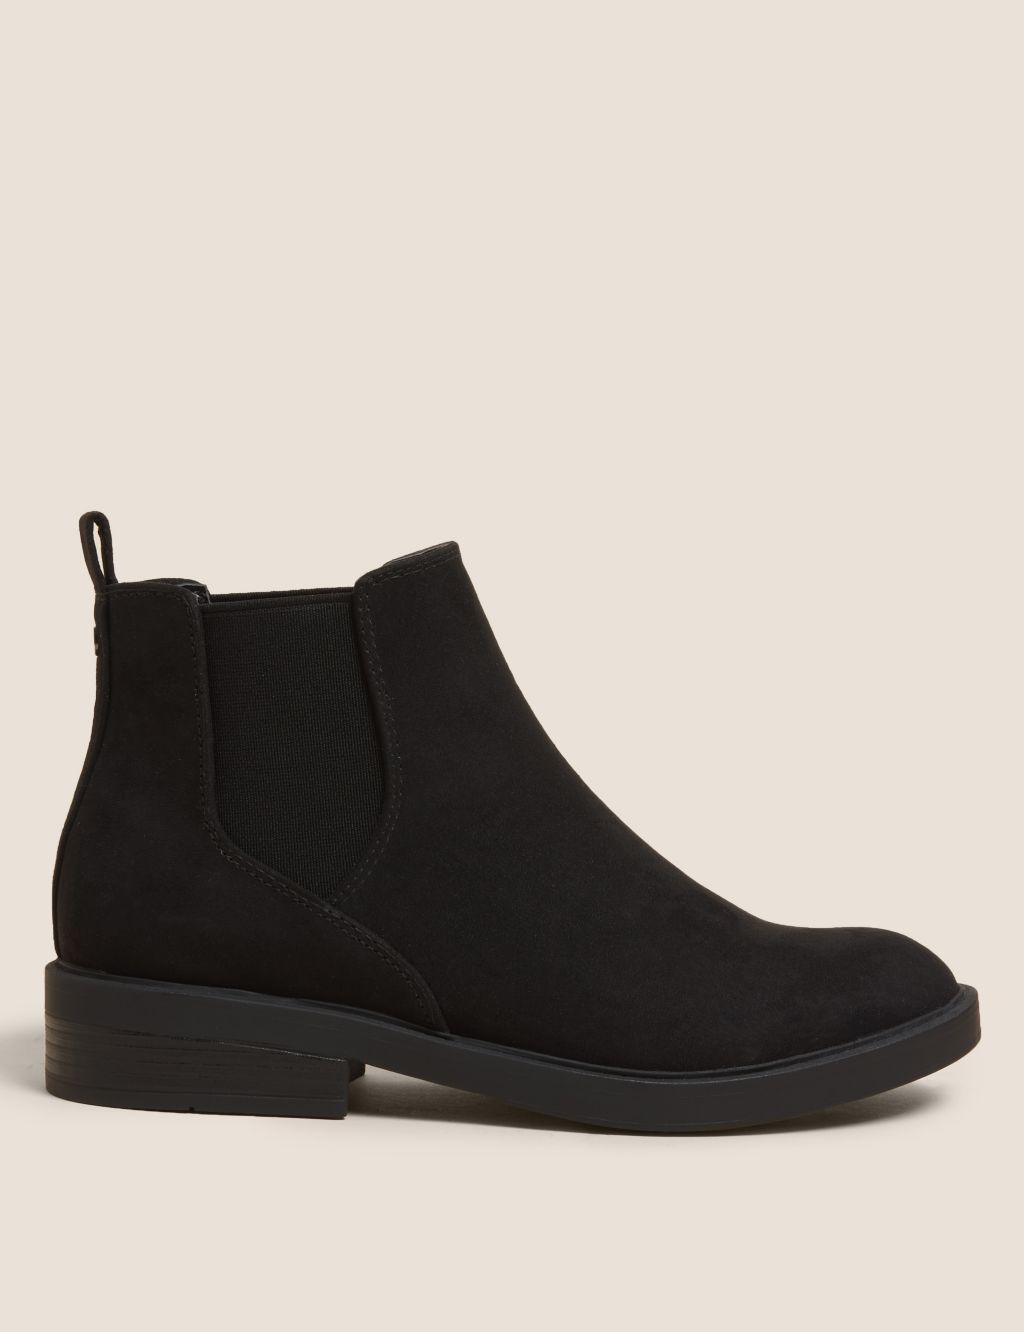 Chelsea Low Ankle Boots image 1